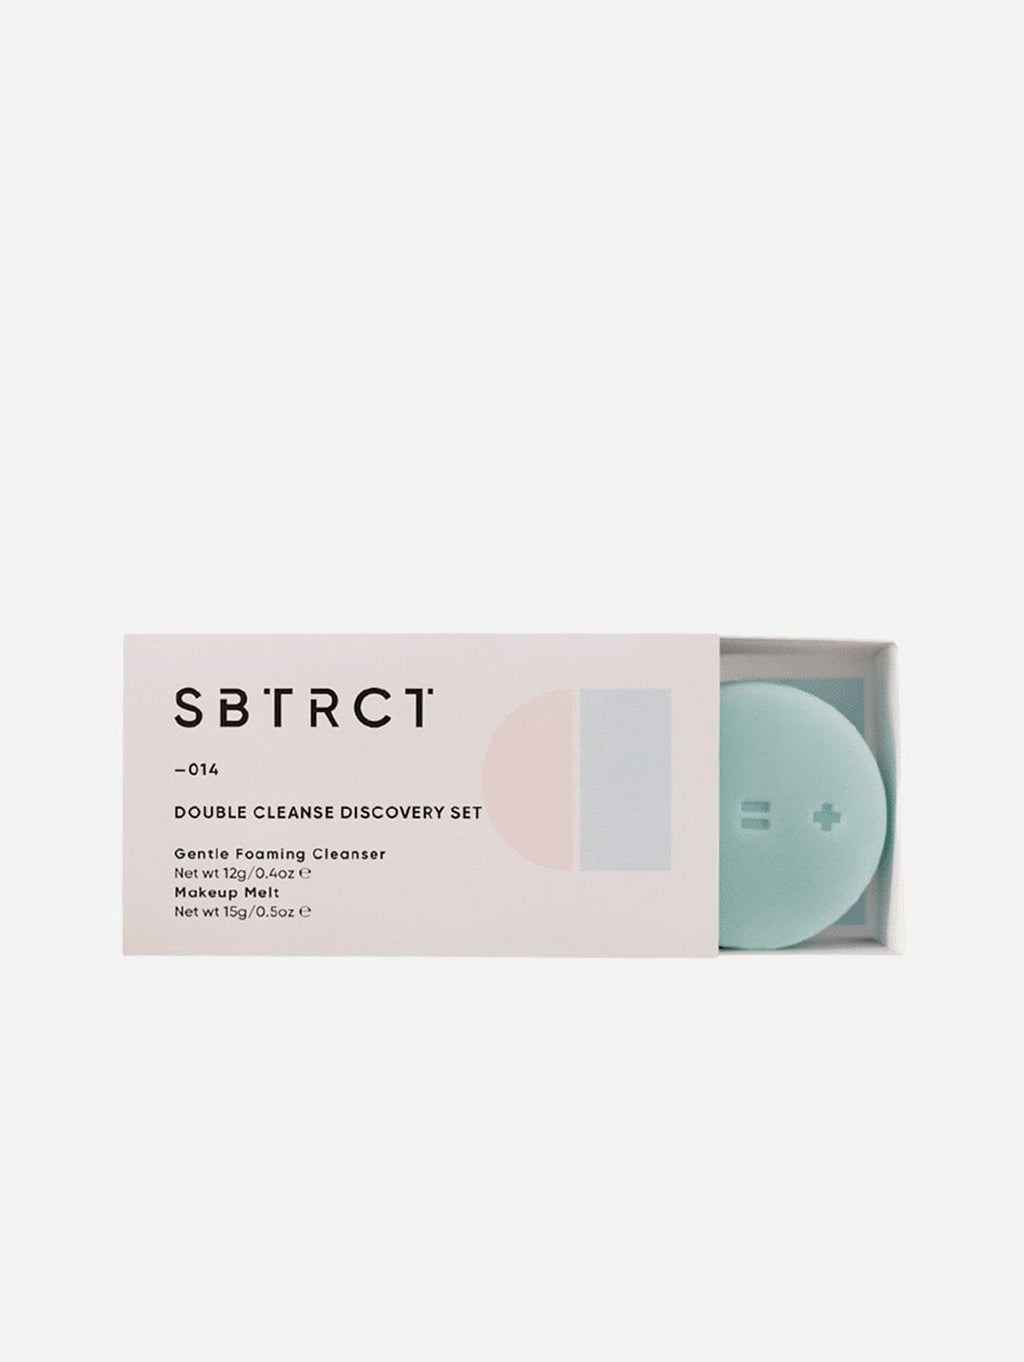 SBTRCT Skincare - The Double Cleanse Discovery Set